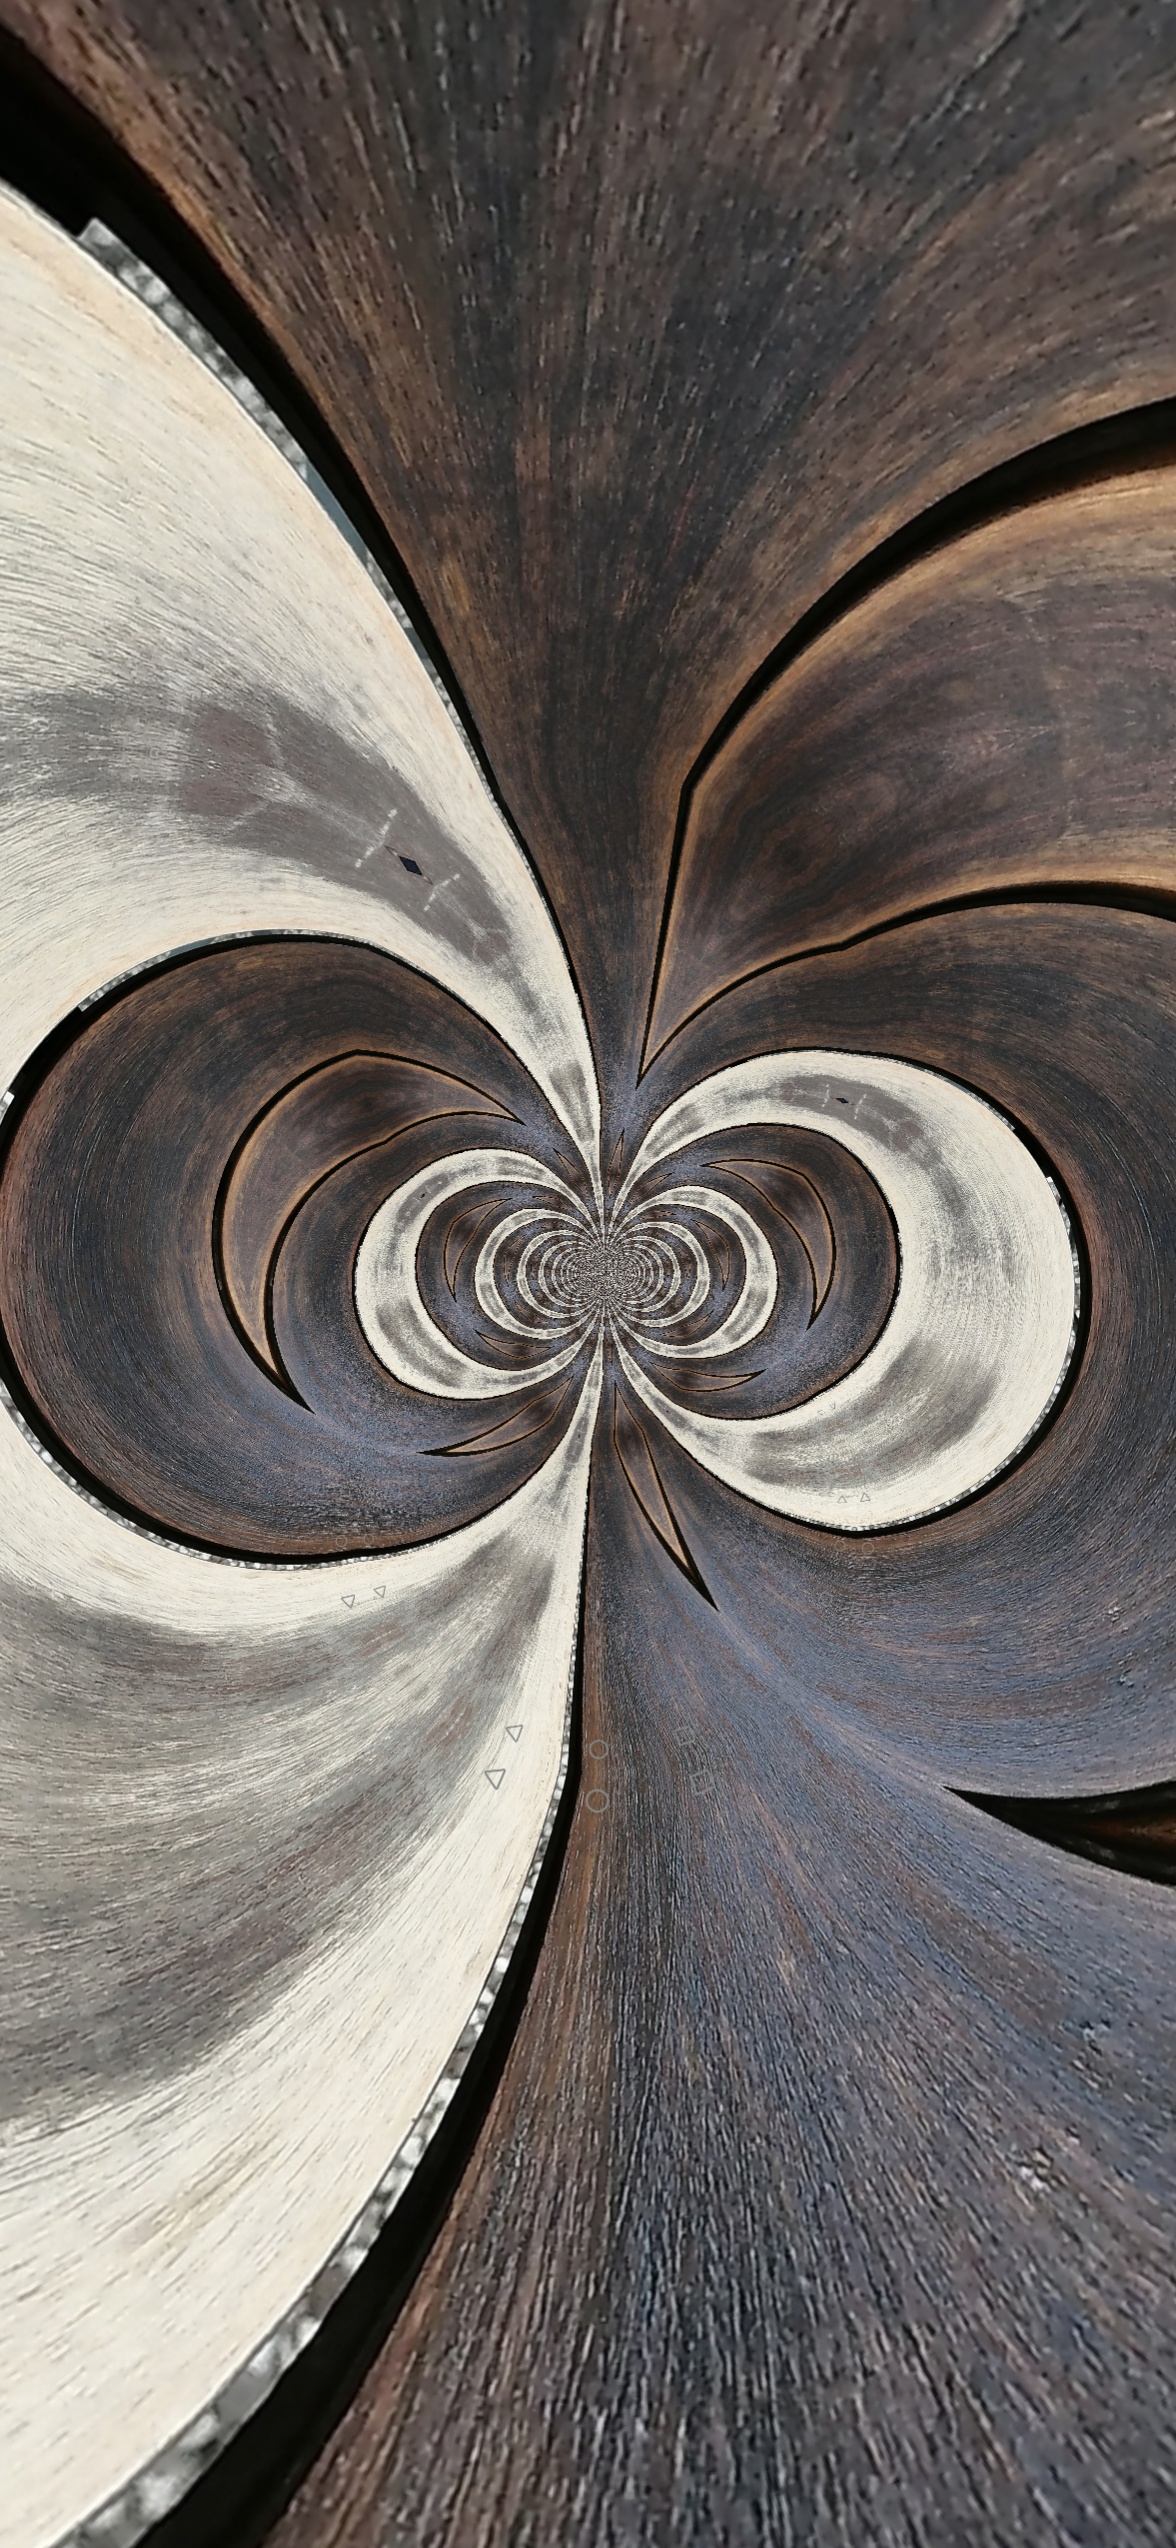 Wood Abstract Spiral 1176x2548